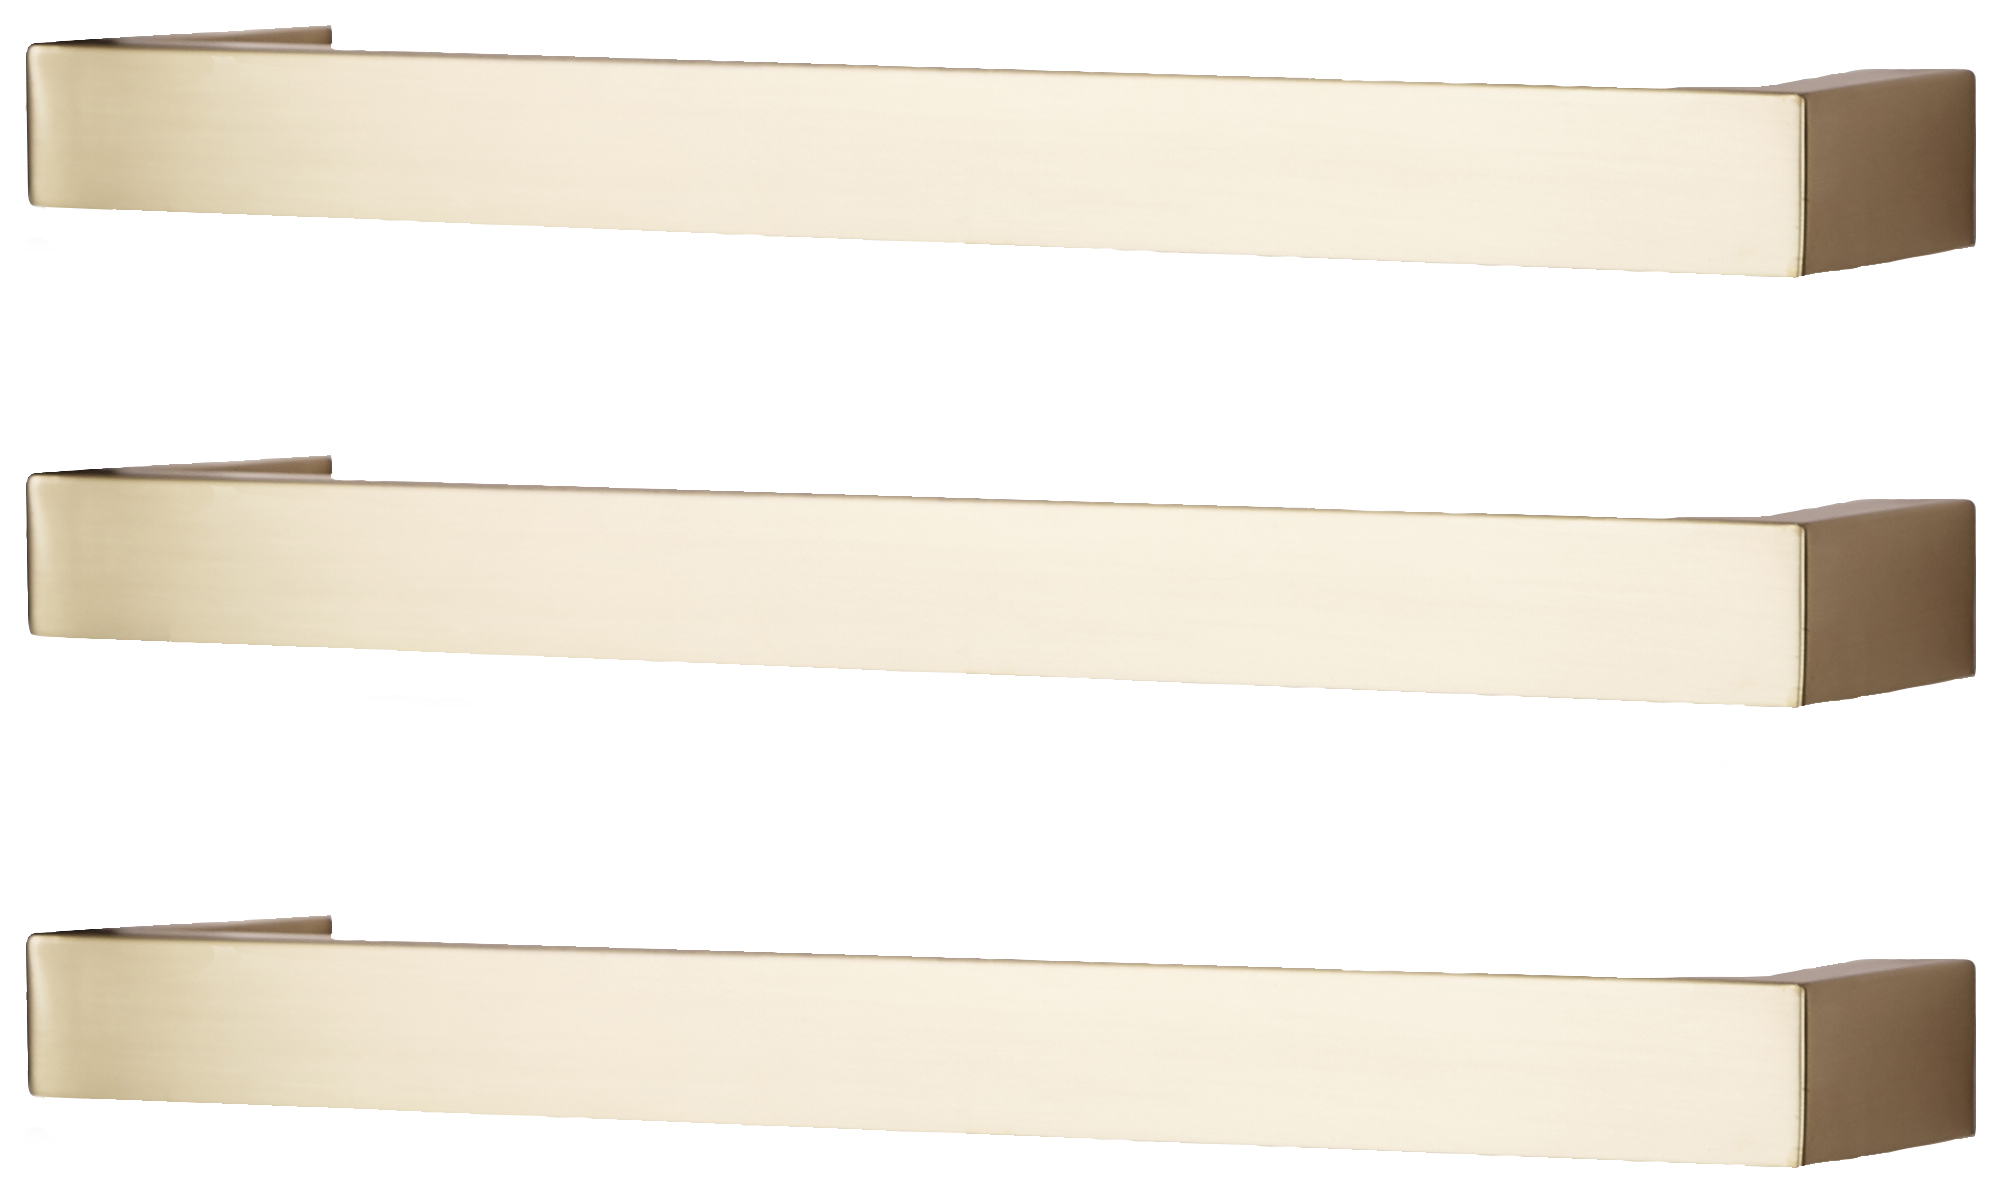 Image of Towelrads Elcot Brushed Brass Dry Electric Towel Bars - 450mm